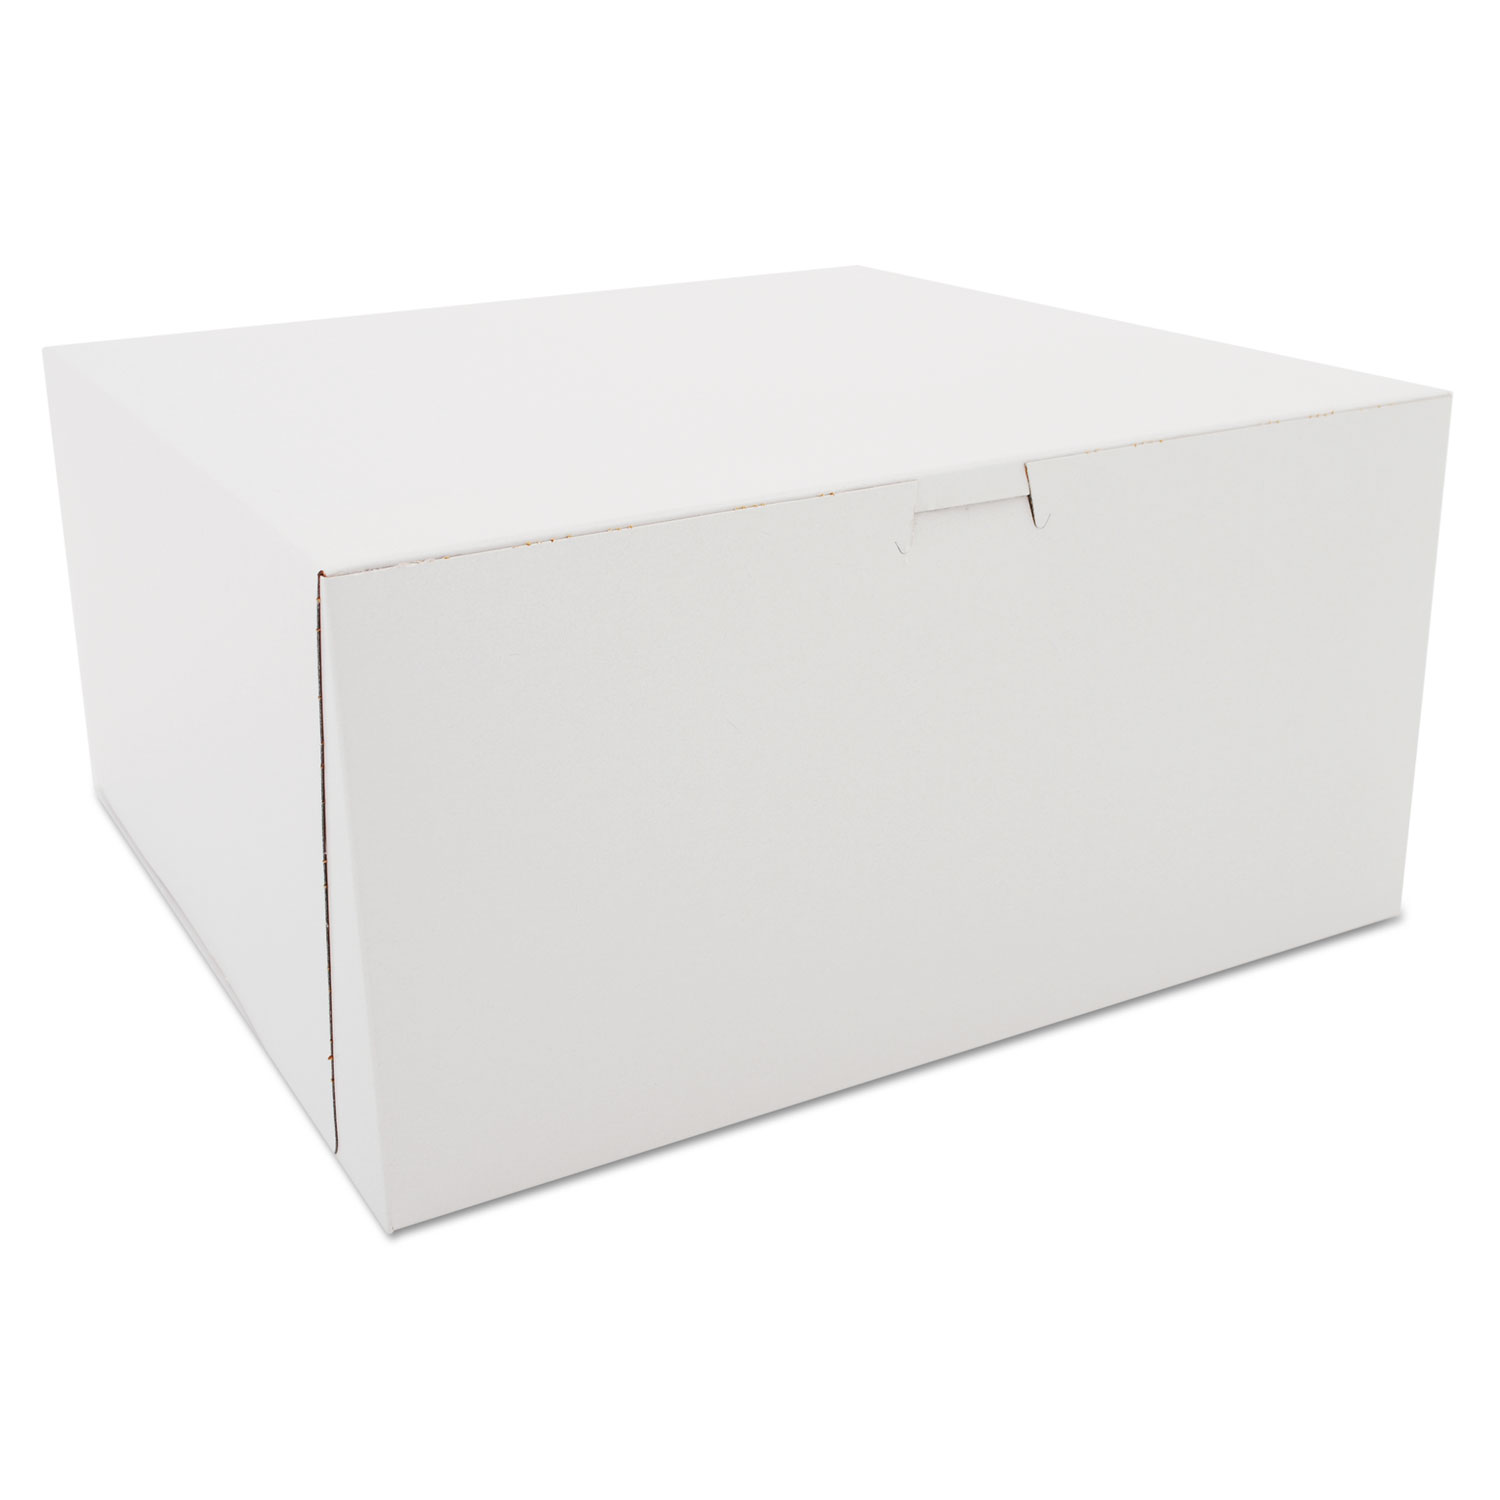 Tuck-Top Bakery Boxes, White, Paperboard, 12 x 12 x 6